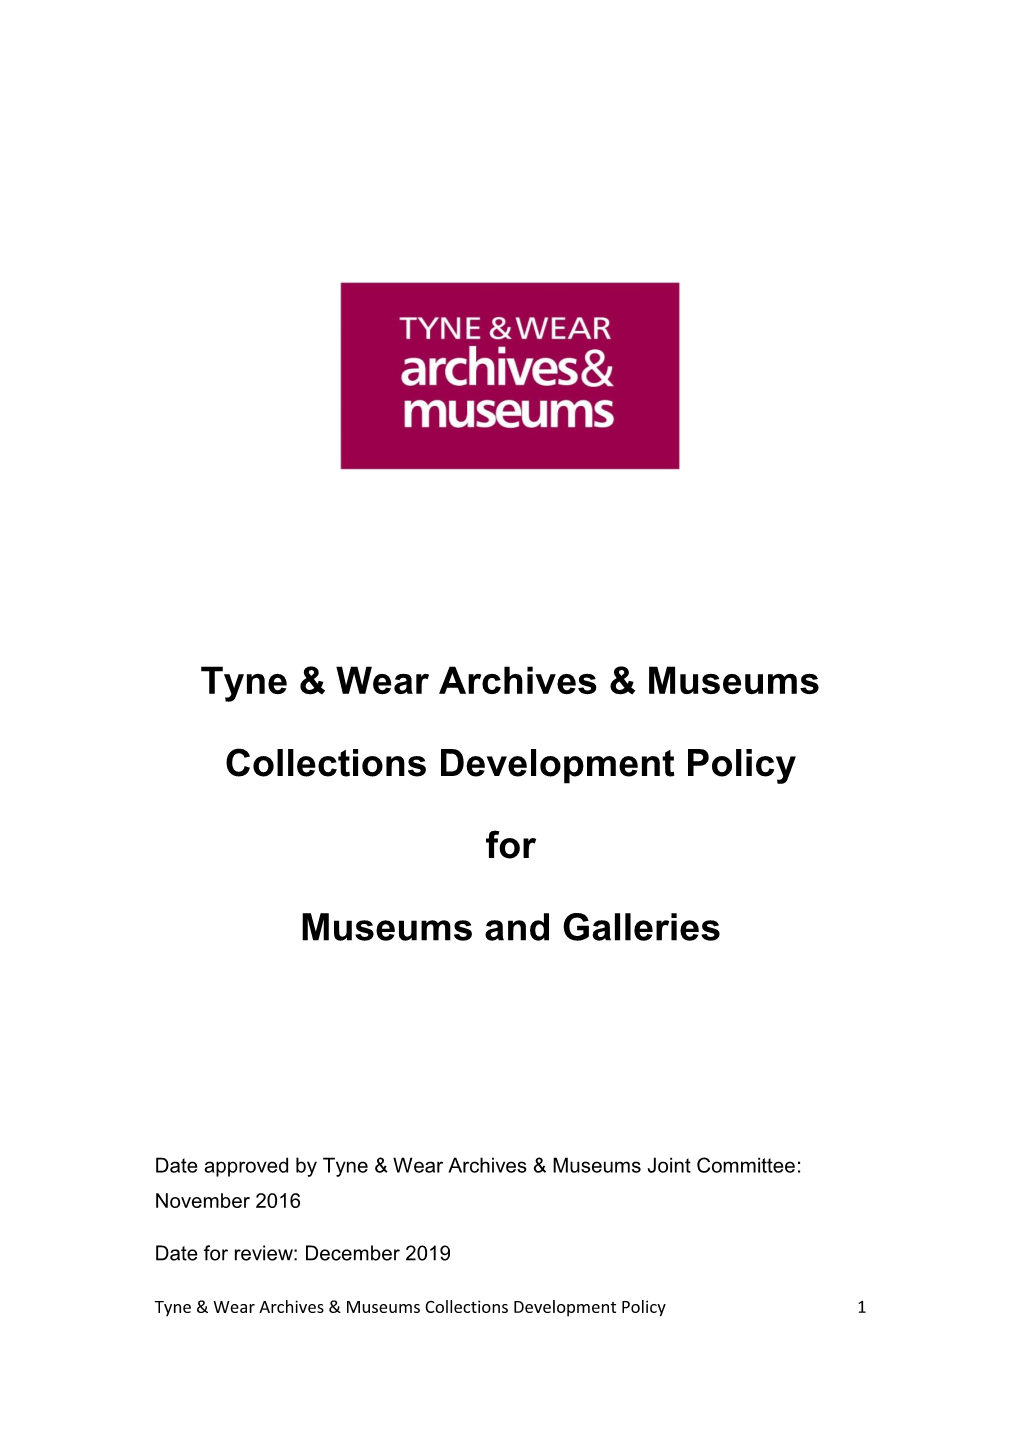 Collections Development Policy for Museums and Galleries